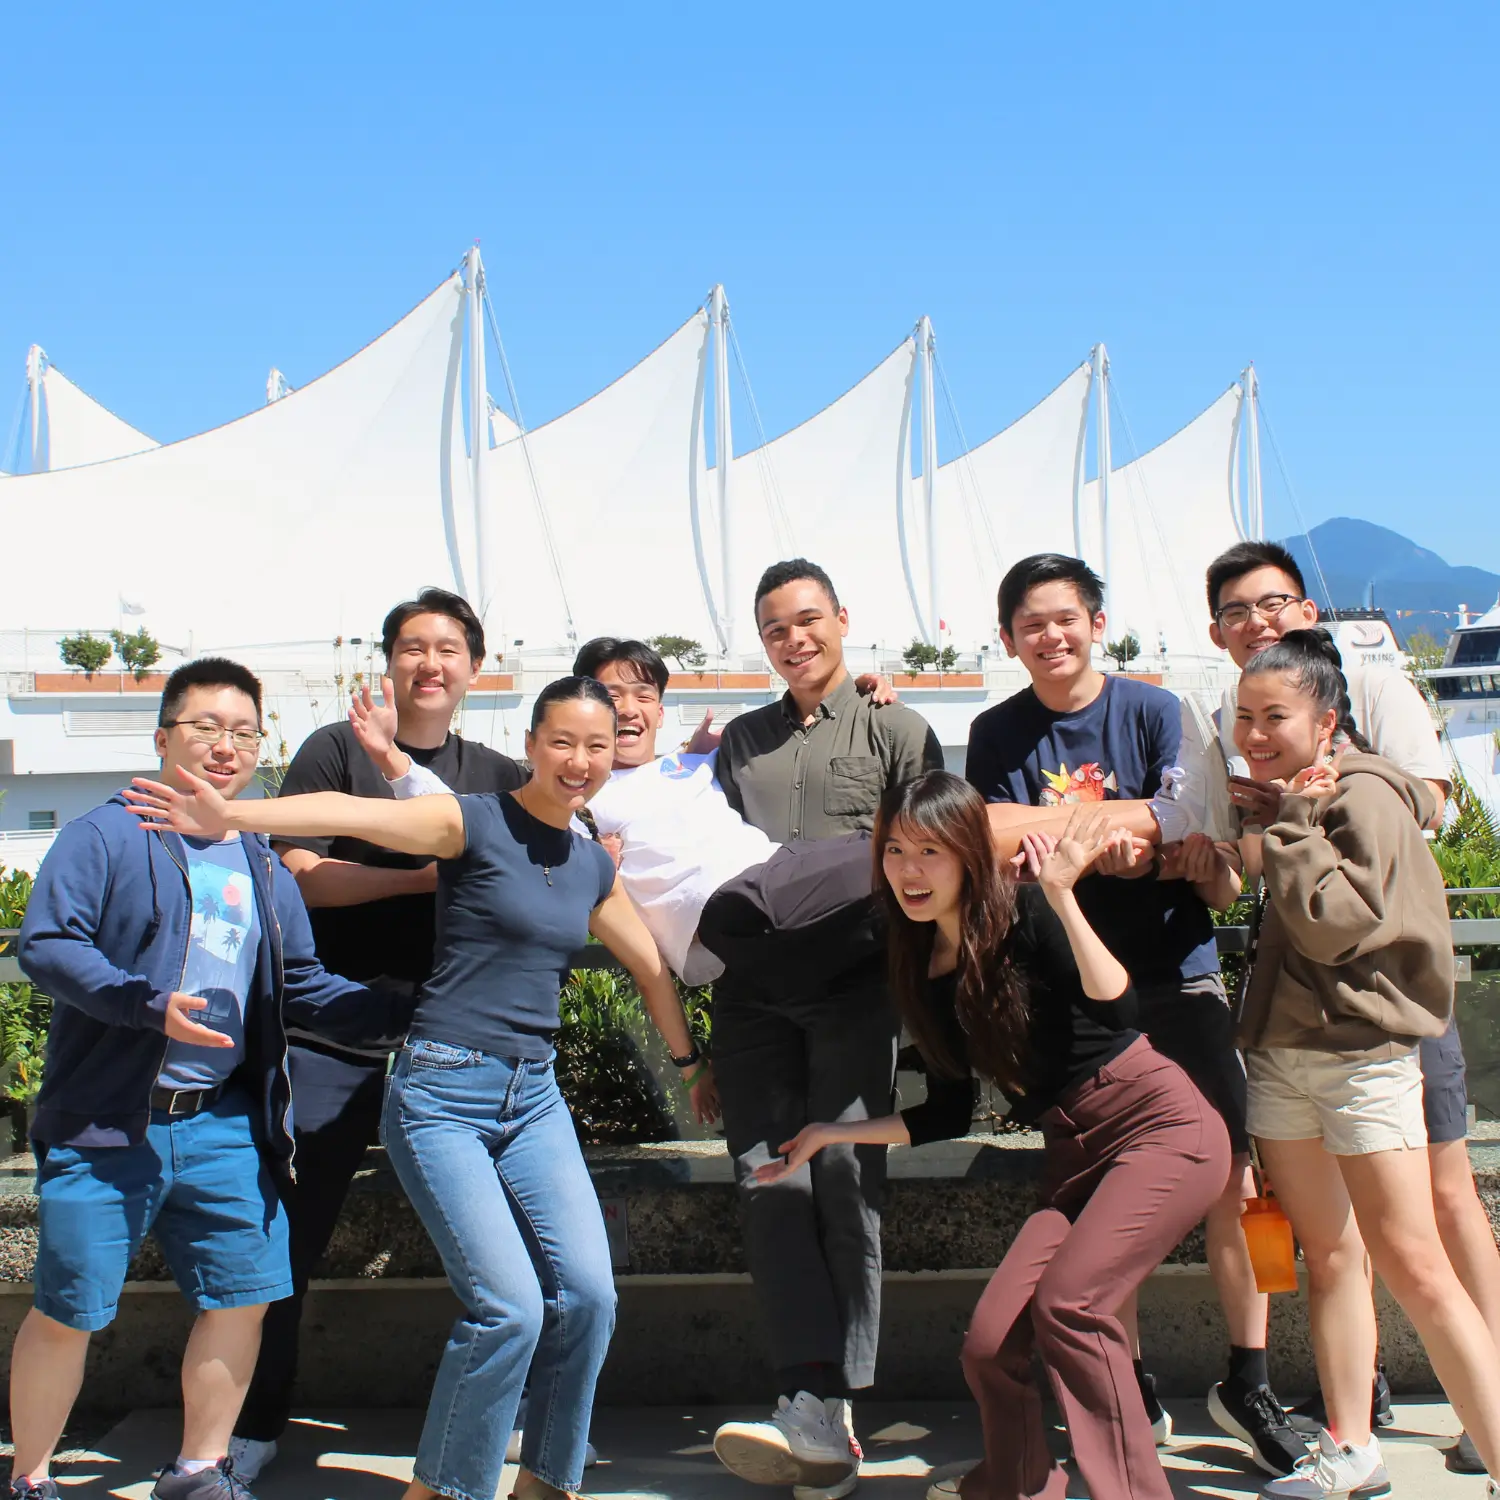 Smiling Co-op employees pose in front of Canada Place